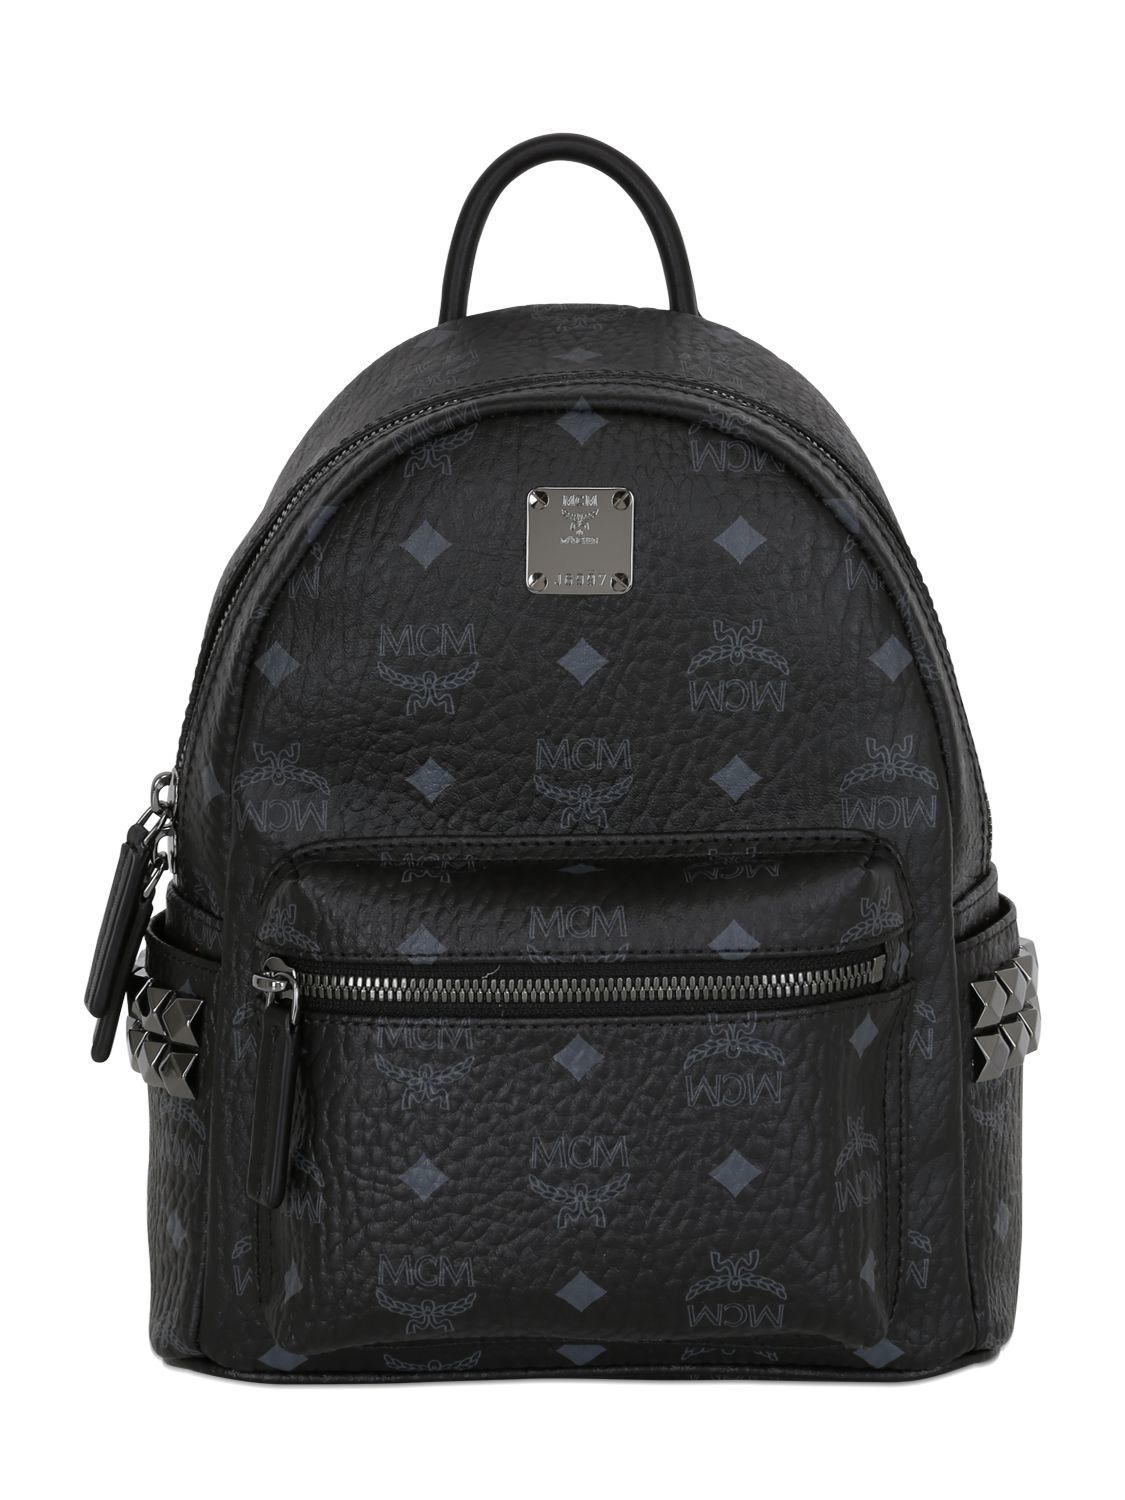 Mcm Mini Stark Faux Leather Backpack in Black | Lyst